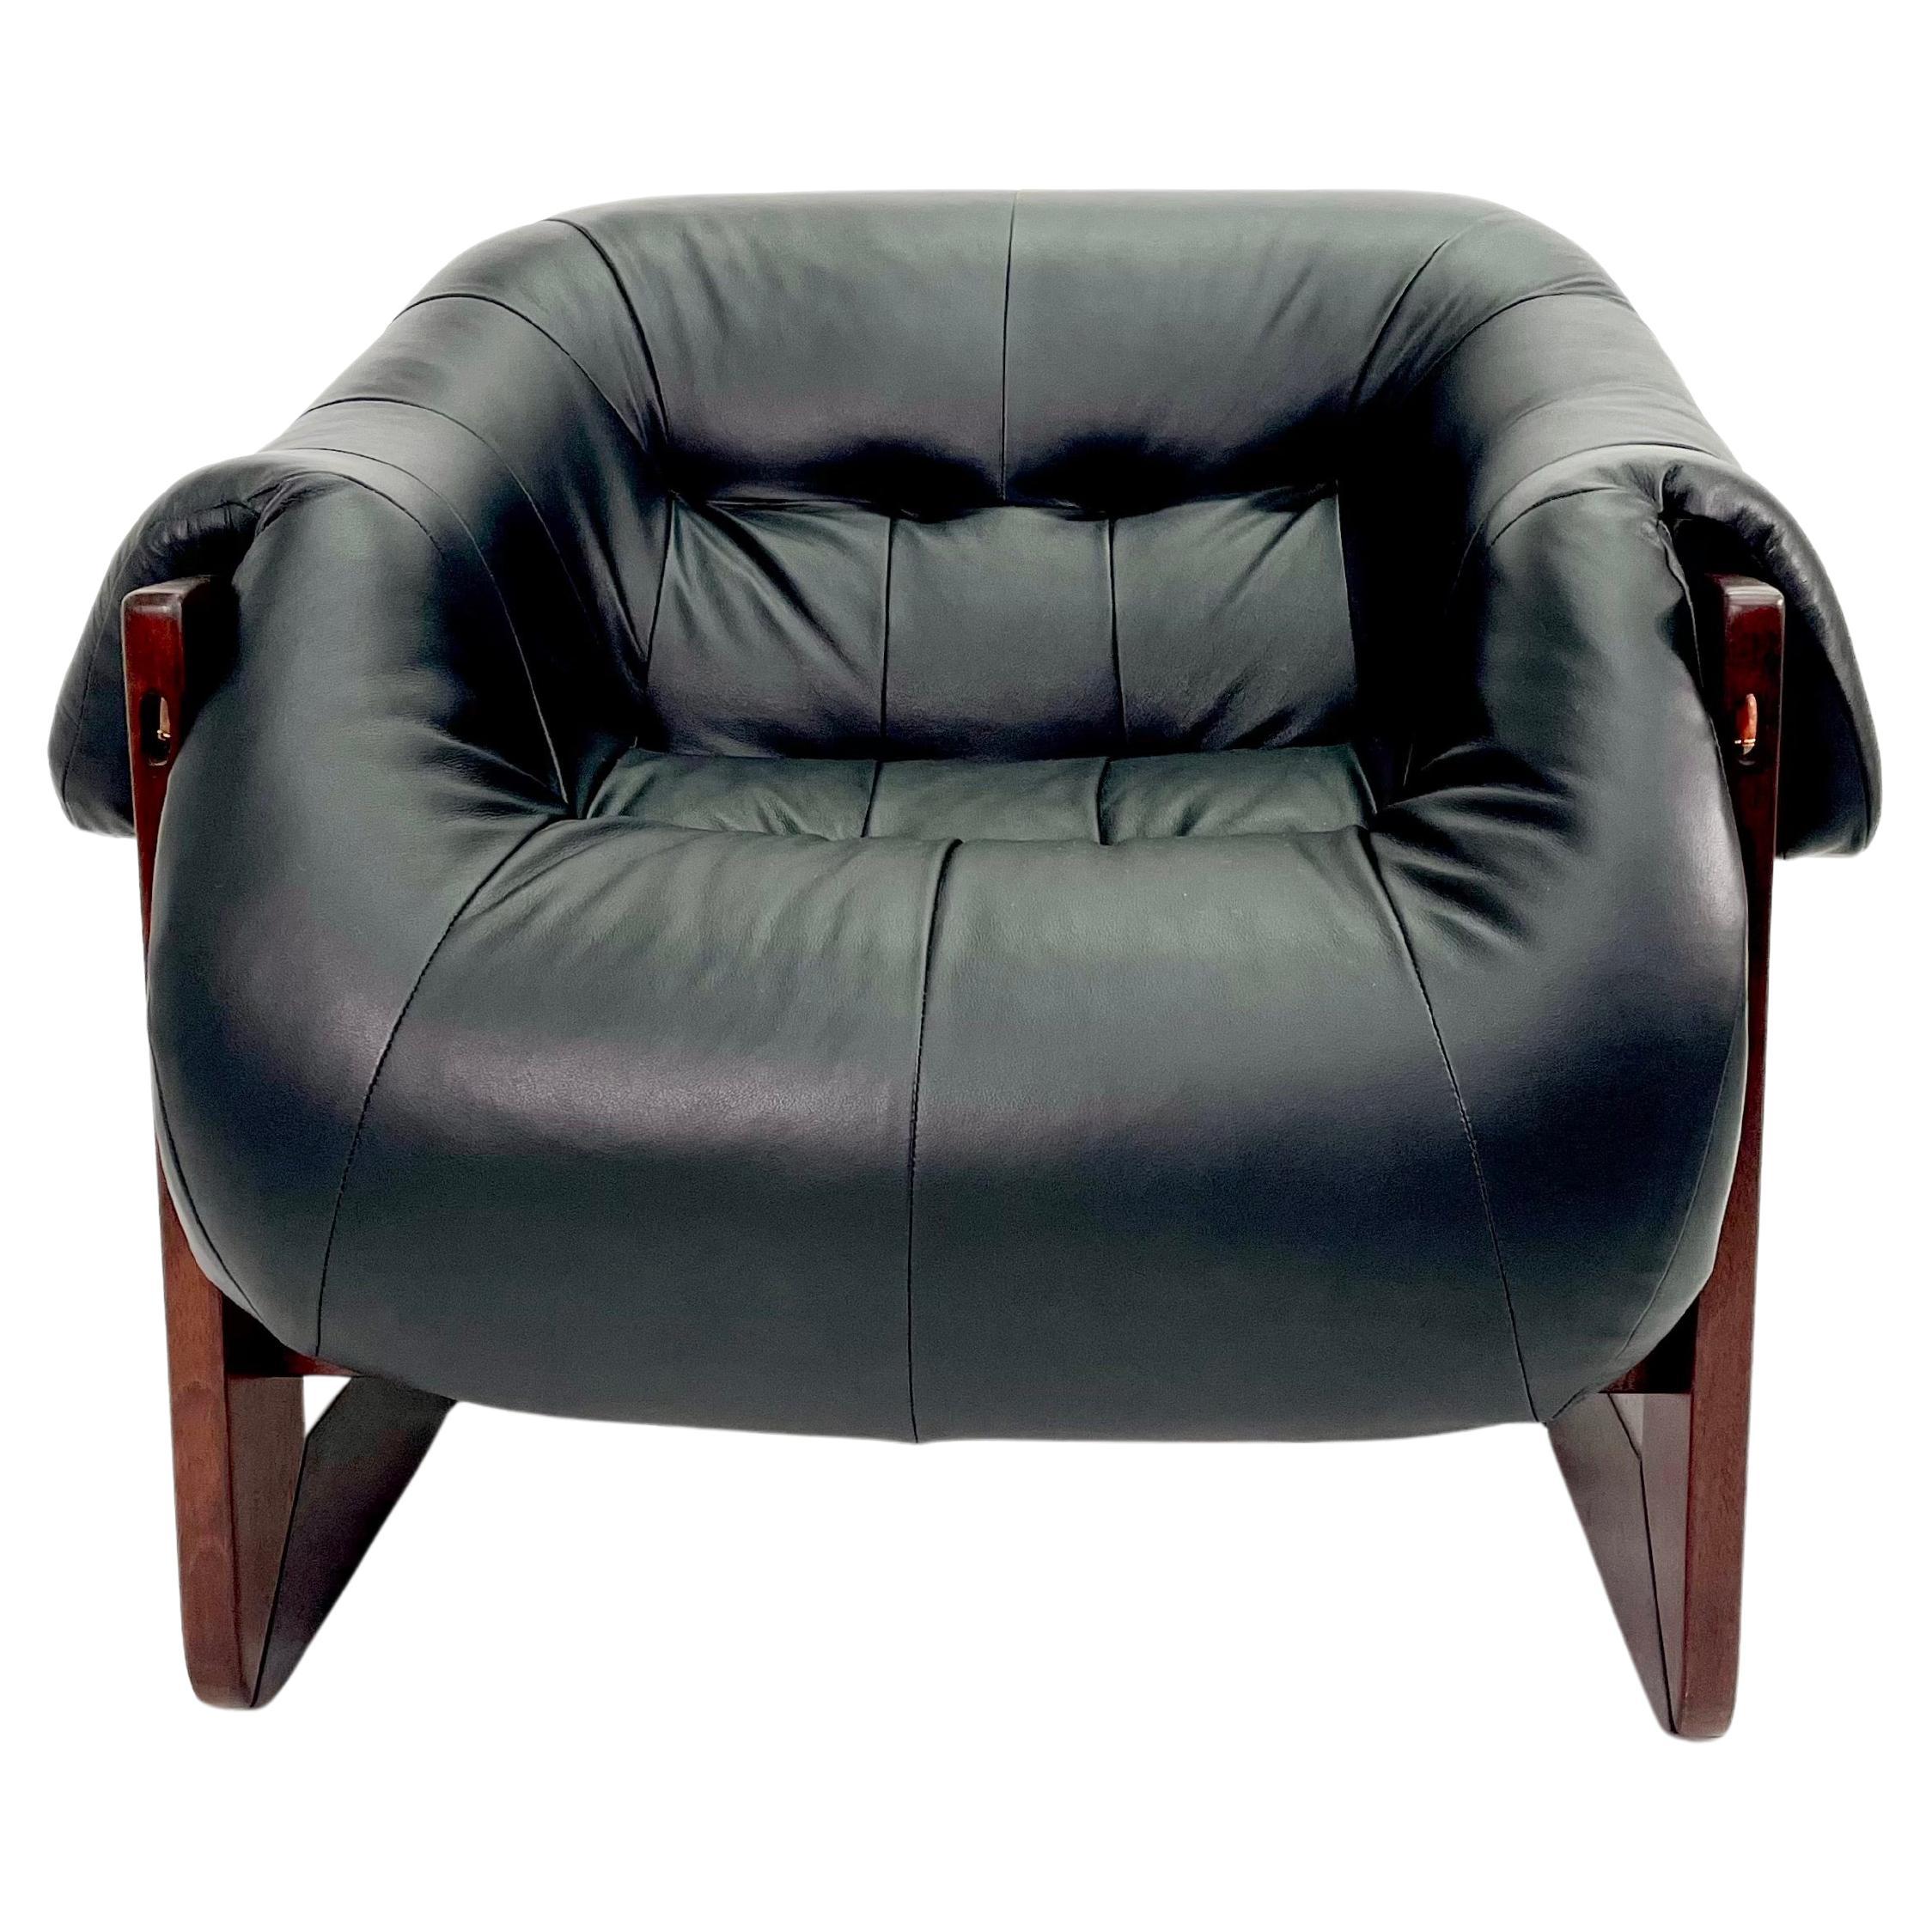 Percival Lafer MP-97 Chair freshly upholstered in black leather 